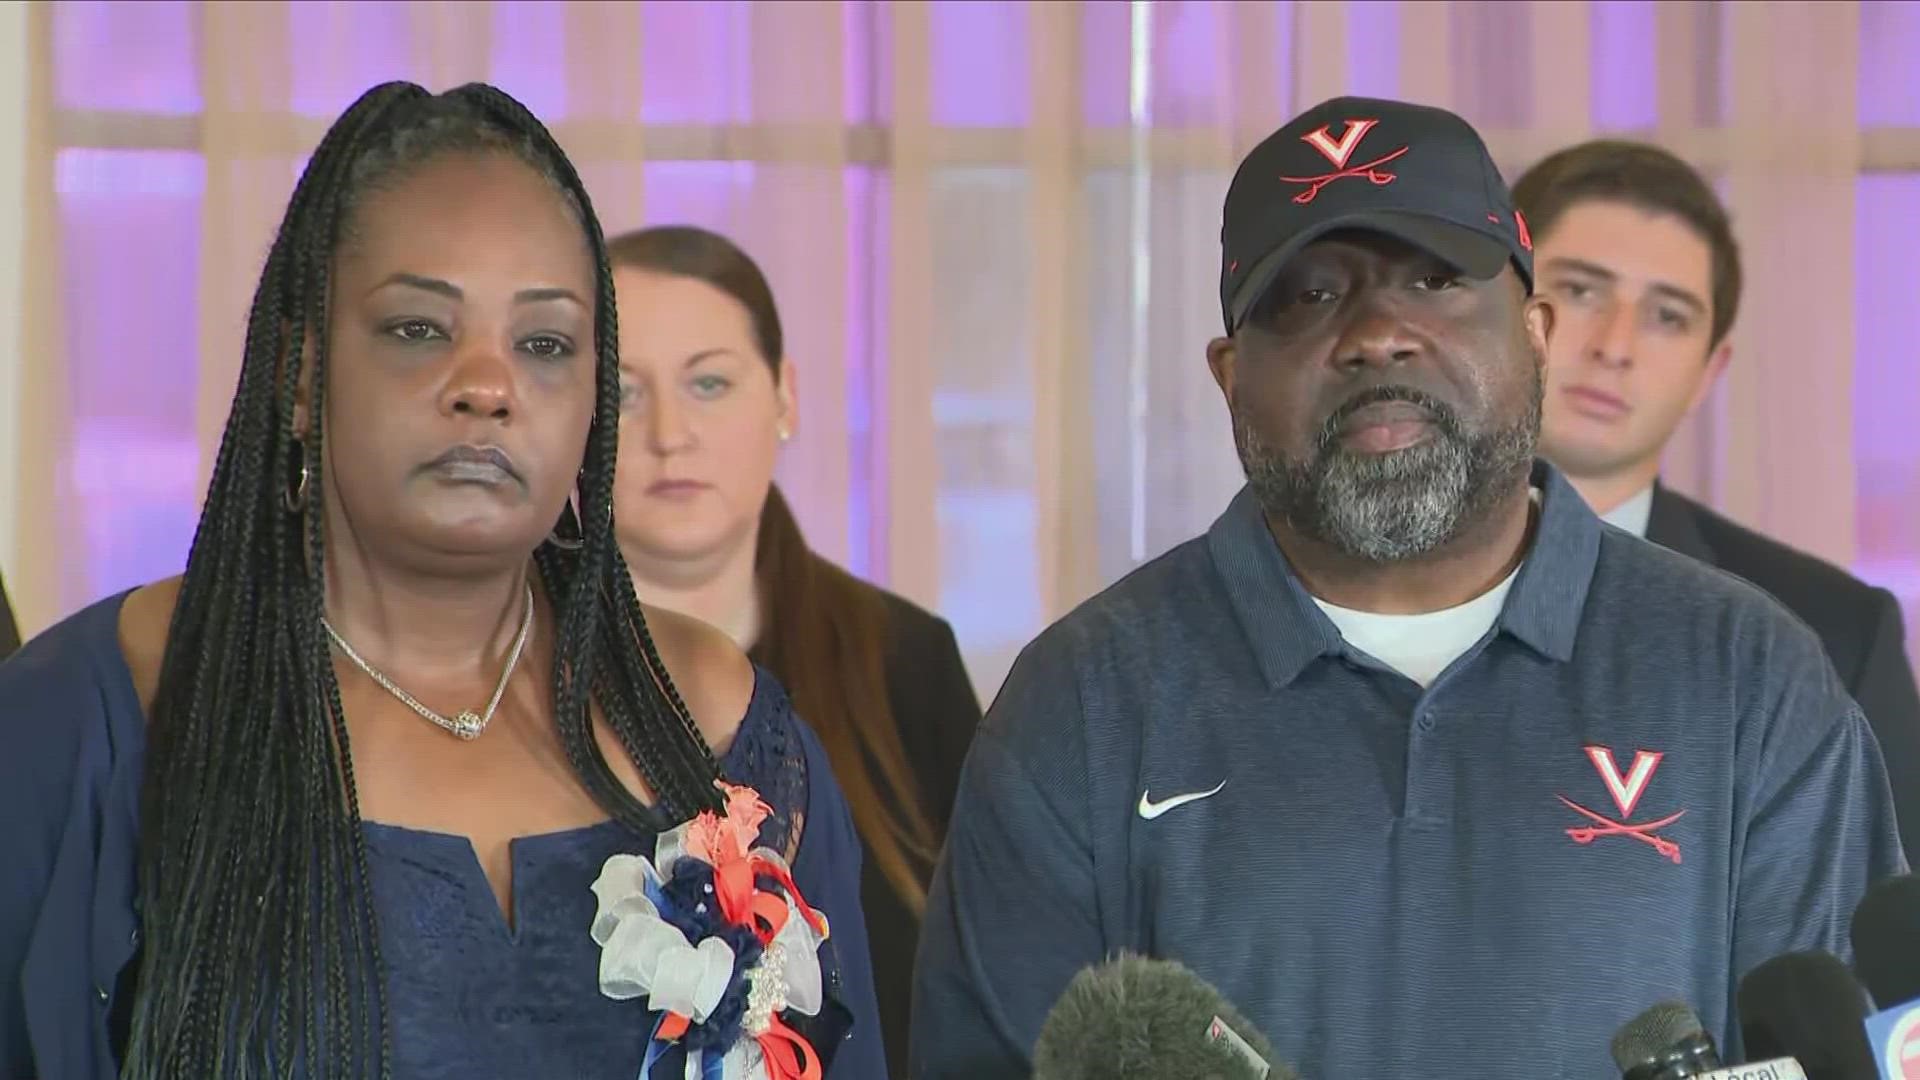 The parents of UVA football player D'Sean Perry, who was one of the three killed in a shooting on UVA grounds in November, spoke out for the first time to the media.